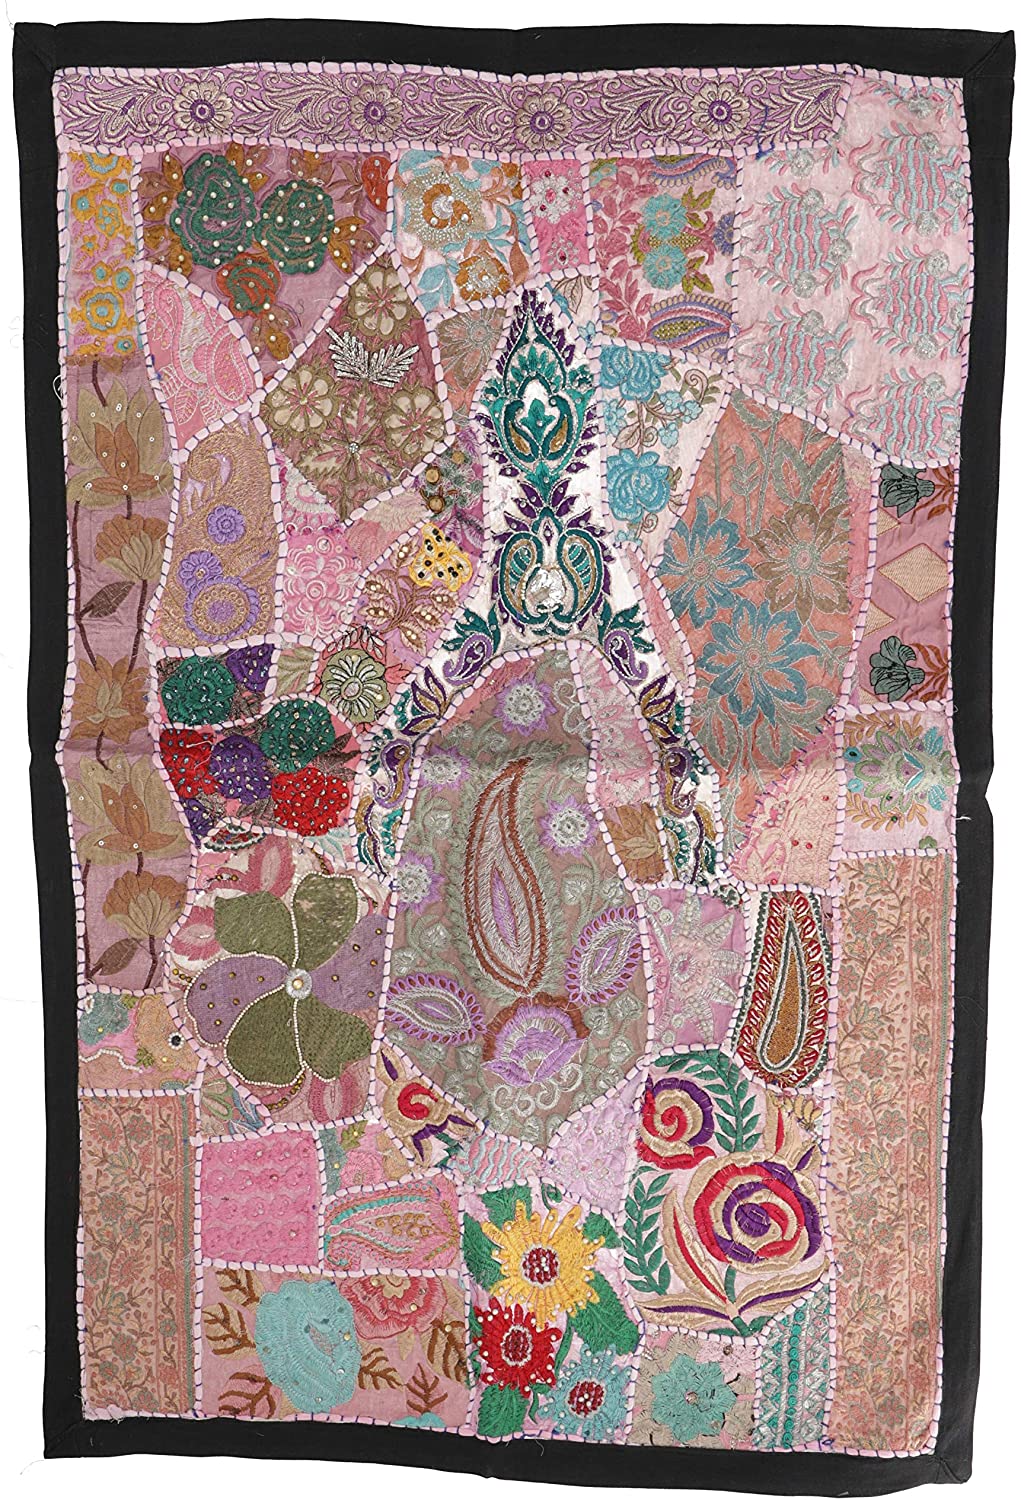 Guru-Shop Indian Tapestry Patchwork Wall Hanging With Elephant, 65 X 90 X 0